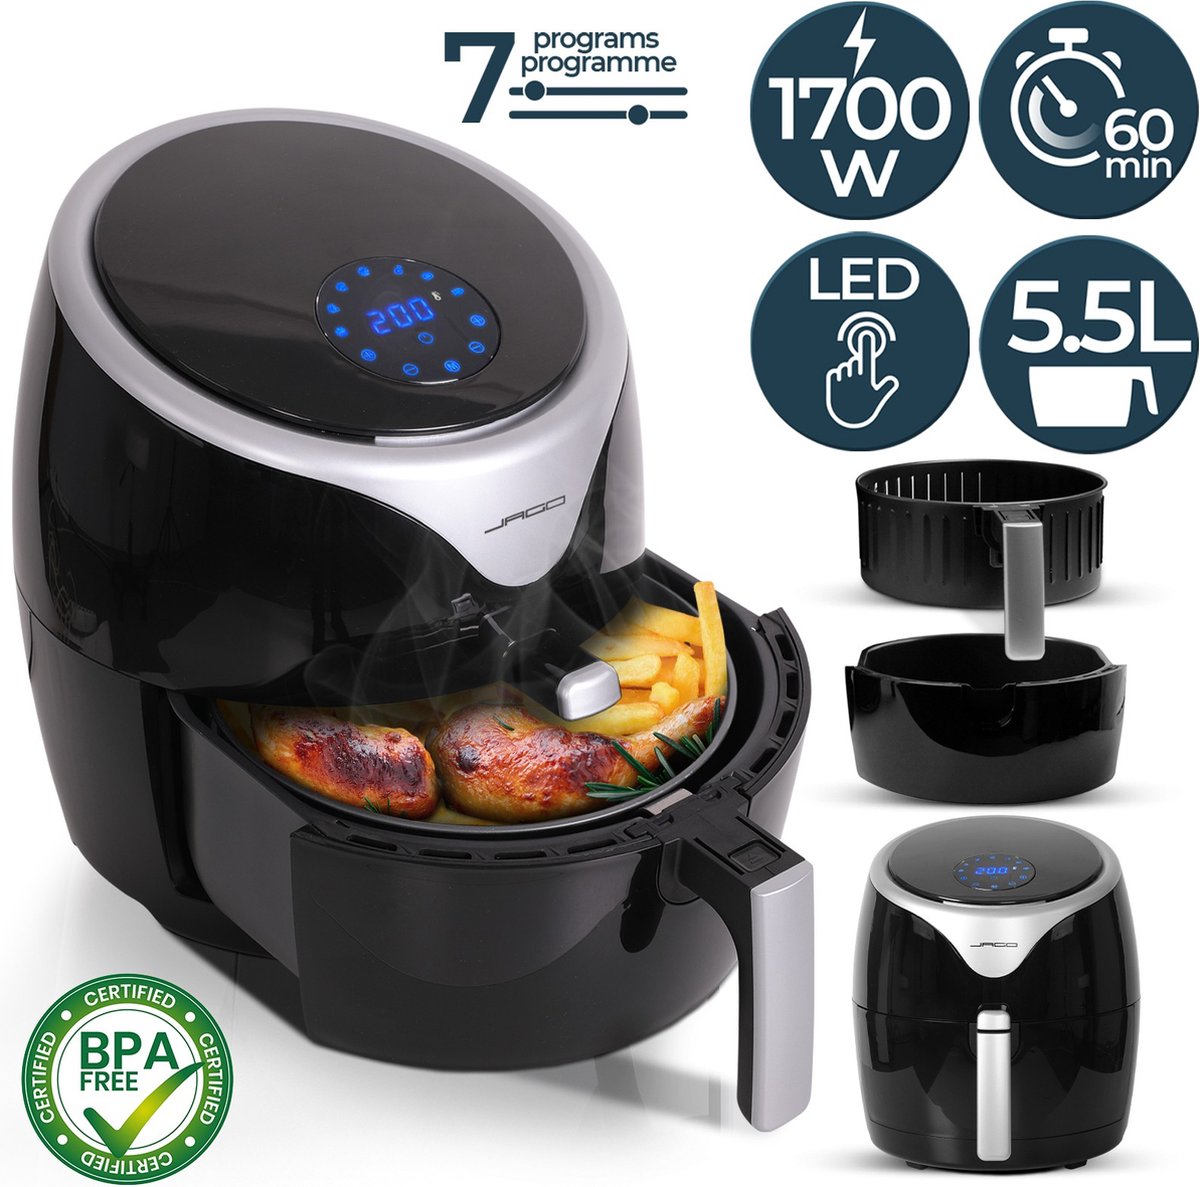 Jago GoodVibes Airfryer XXL 7-in-1 Hot Air Oven 5.5L 1700 Watt LED Display with Touch Screen 7 Programmes Build-in 60 Minute Timer Hot Air Fryer Black